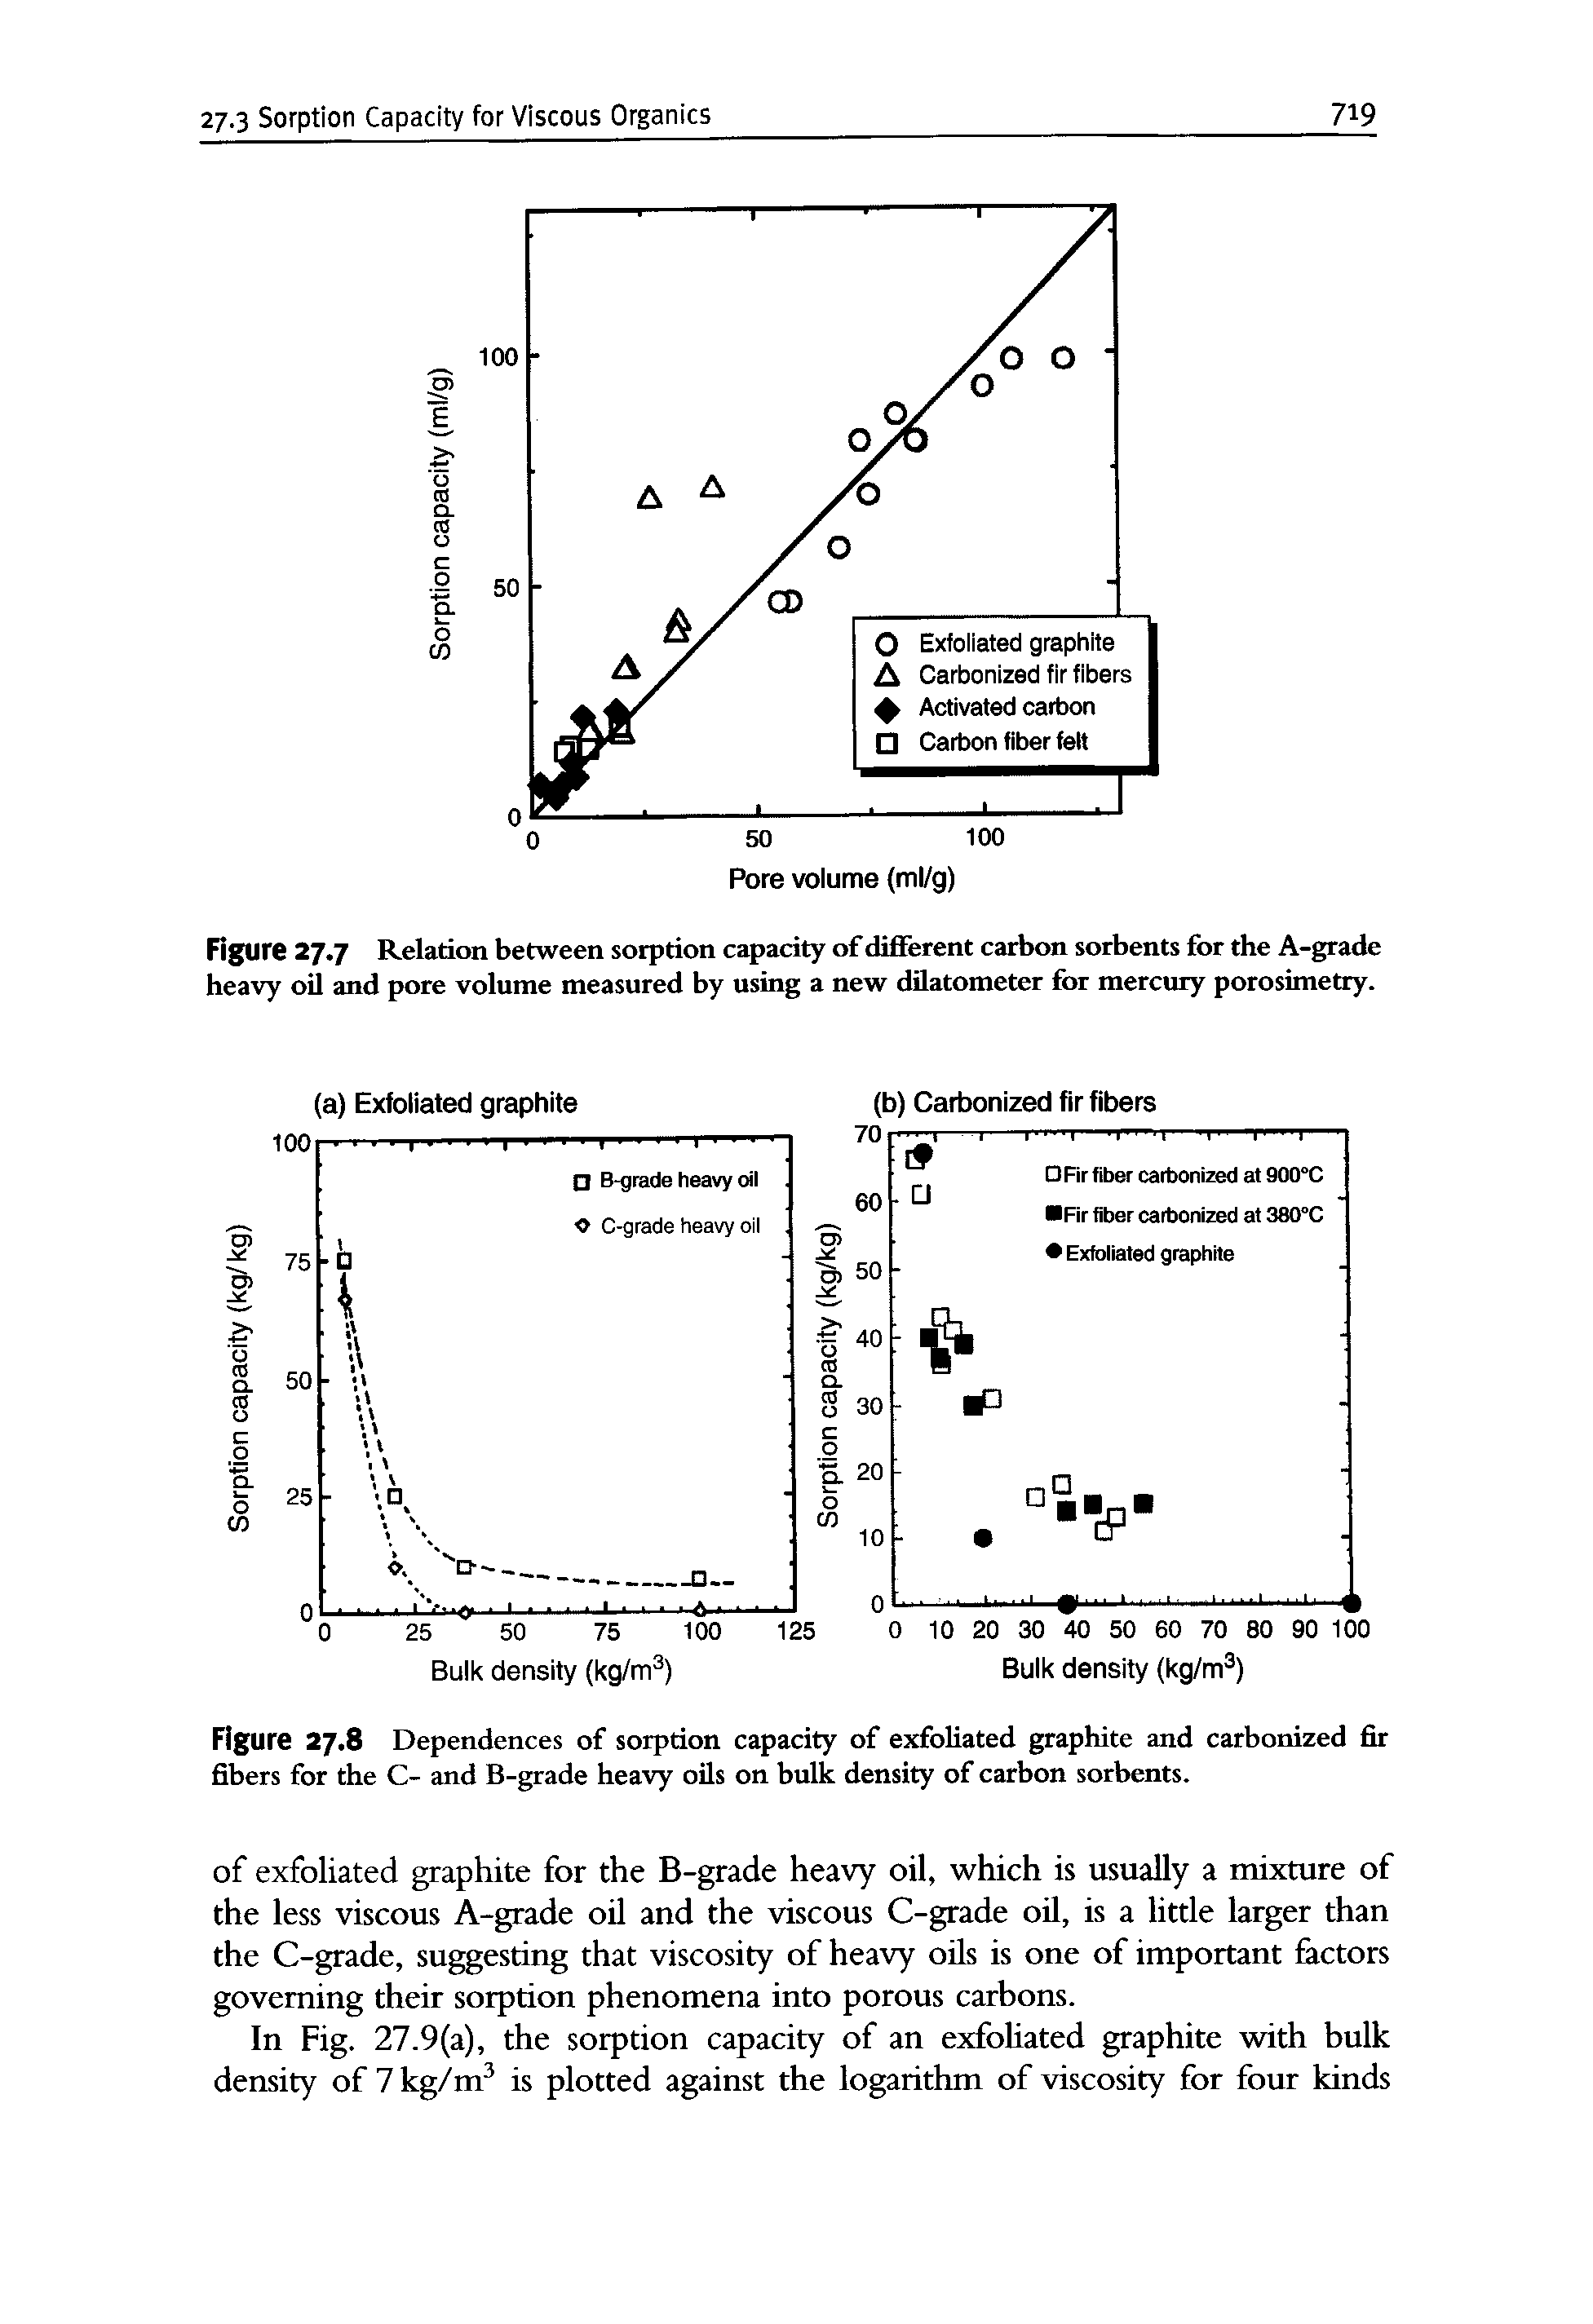 Figure 27.8 Dependences of sorption capacity of exfoliated graphite and carbonized fir fibers for the C- and B-grade heavy oils on bulk density of carbon sorbents.